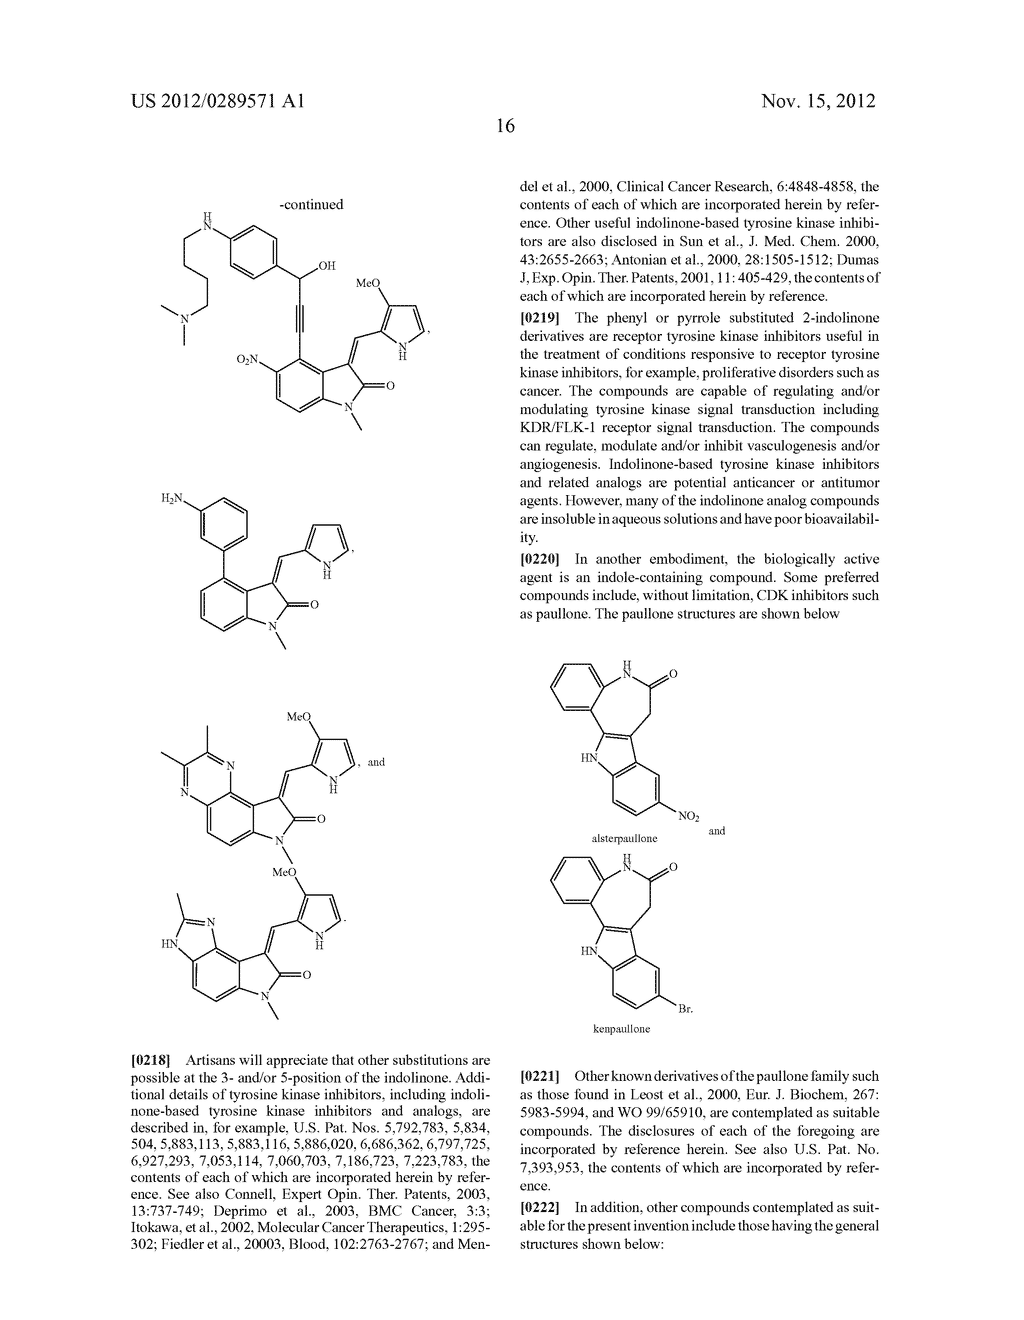 POLYMERIC CONJUGATES OF AROMATIC AMINE CONTAINING COMPOUNDS INCLUDING     RELEASABLE UREA LINKER - diagram, schematic, and image 37